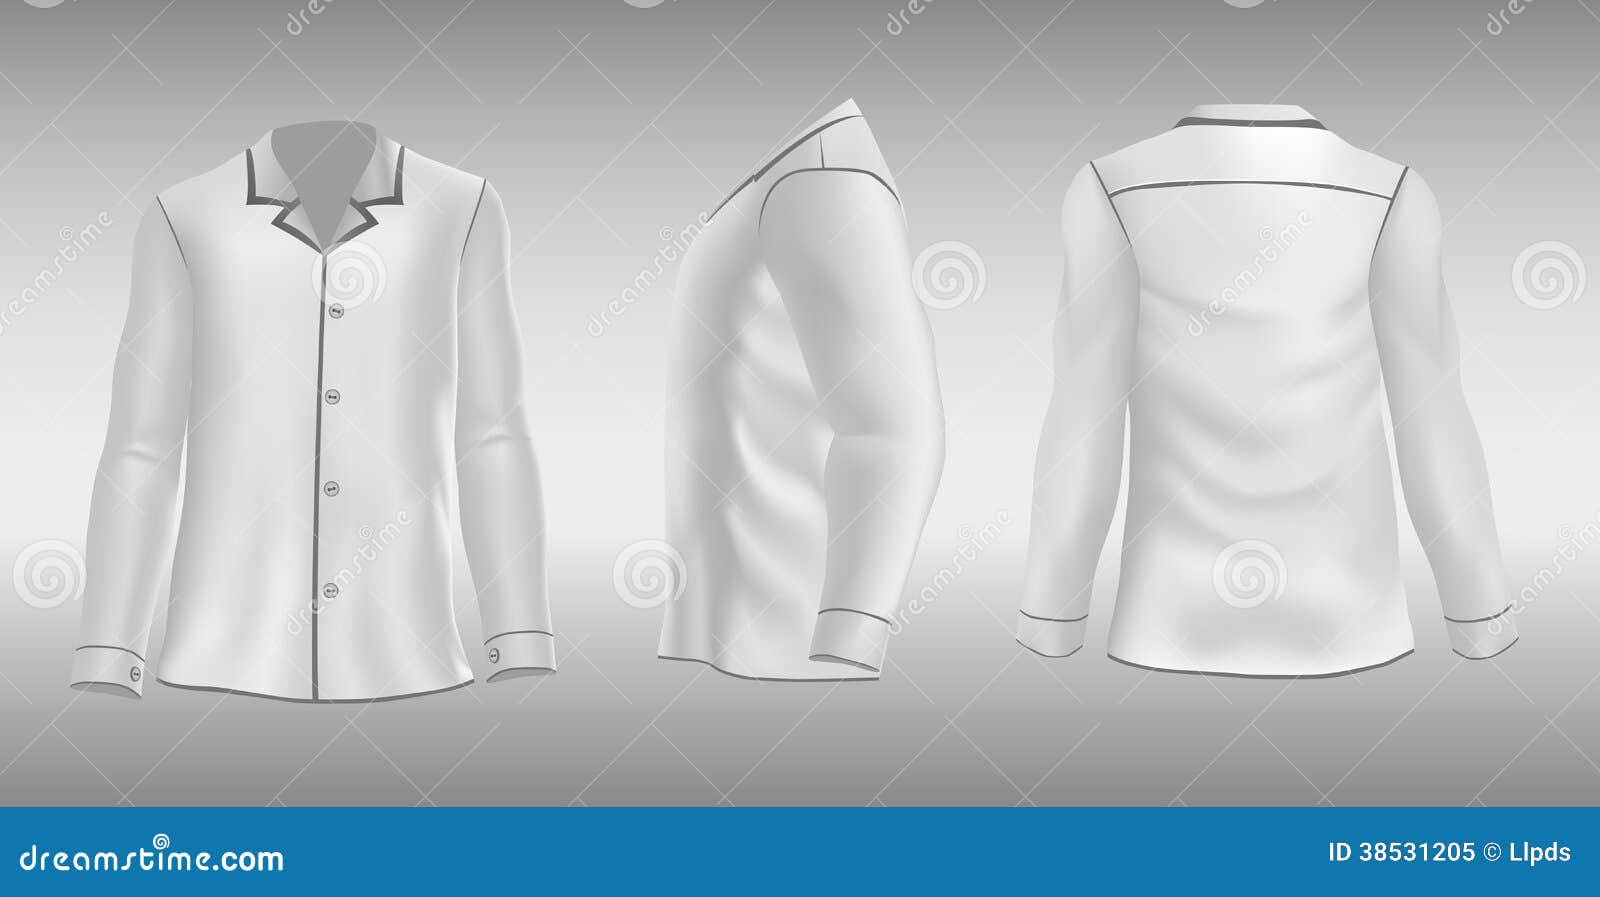 T-shirt With Sleeves And Collar Royalty Free Stock Photo - Image: 38531205